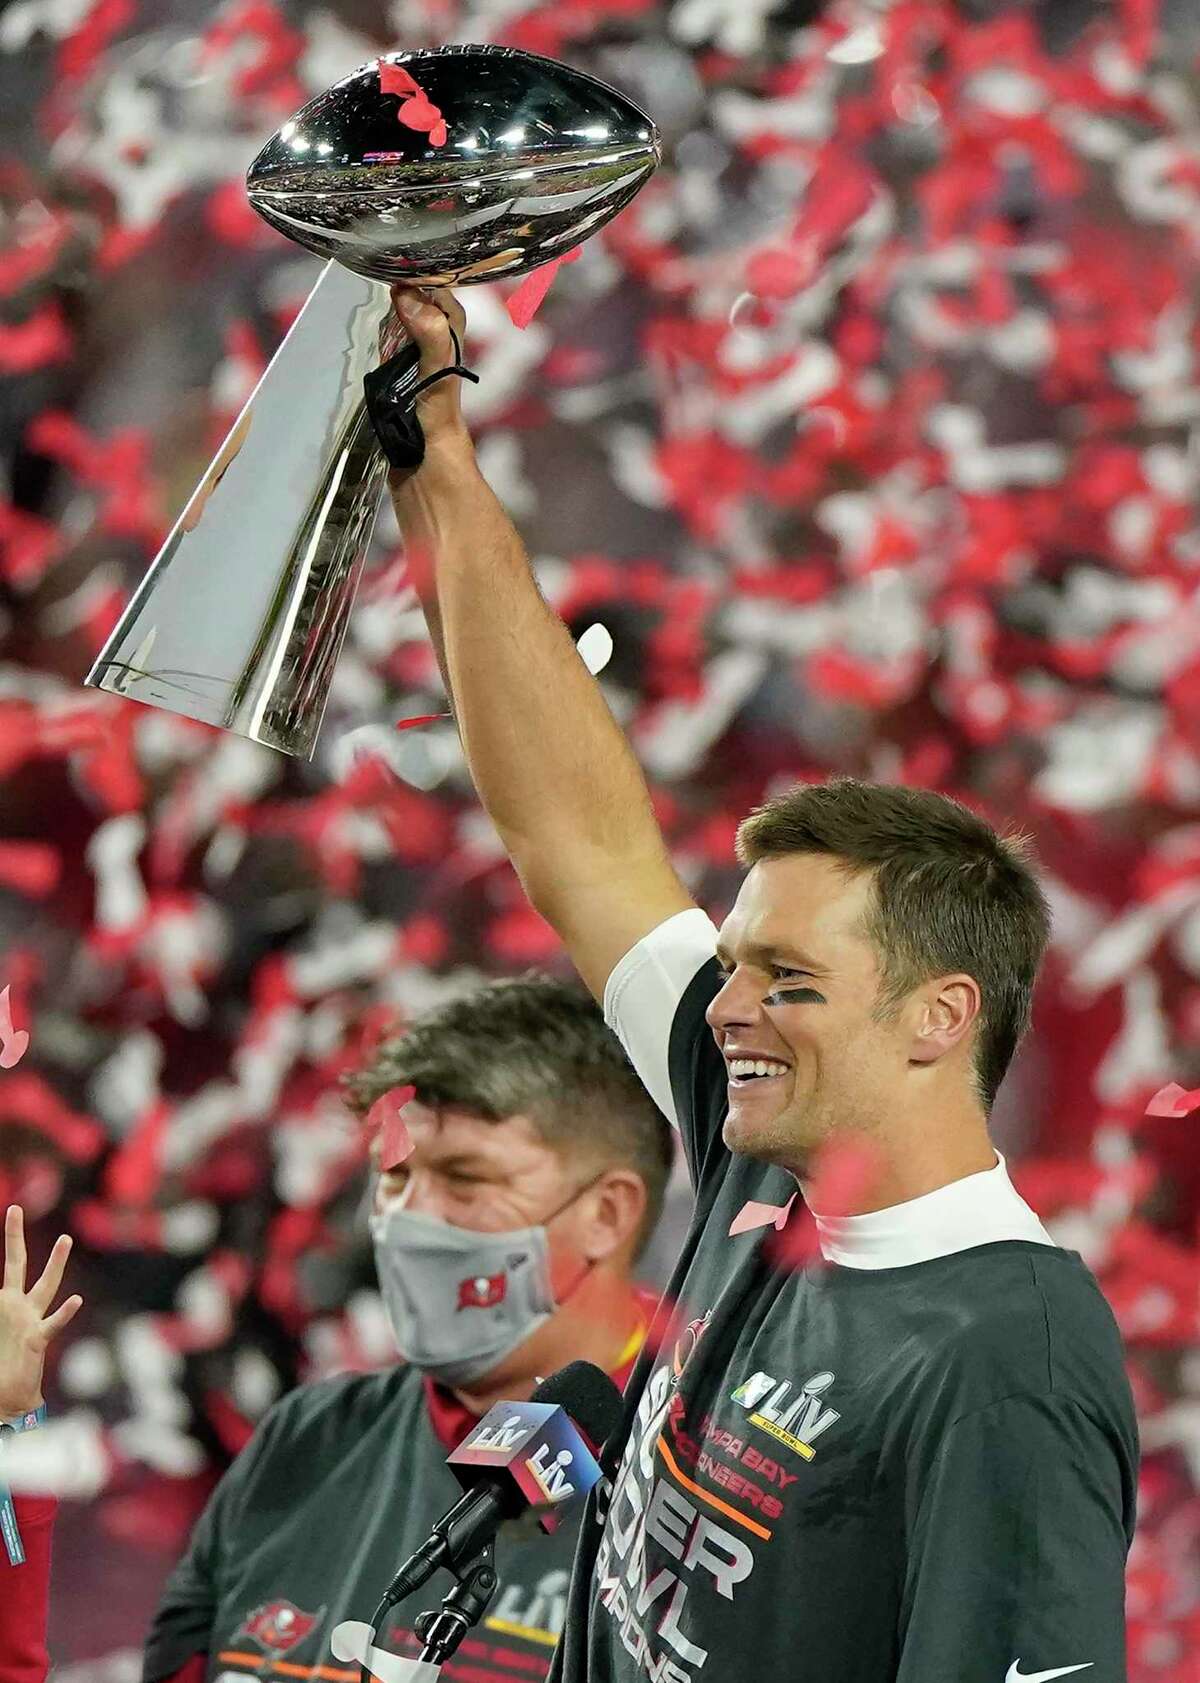 Tampa Bay Buccaneers quarterback Tom Brady celebrates with the Vince Lombardi Trophy after the NFL Super Bowl 55 football game against the Kansas City Chiefs Sunday, Feb. 7, 2021, in Tampa, Fla. The Buccaneers defeated the Chiefs 31-9 to win the Super Bowl. (AP Photo/Gregory Bull)